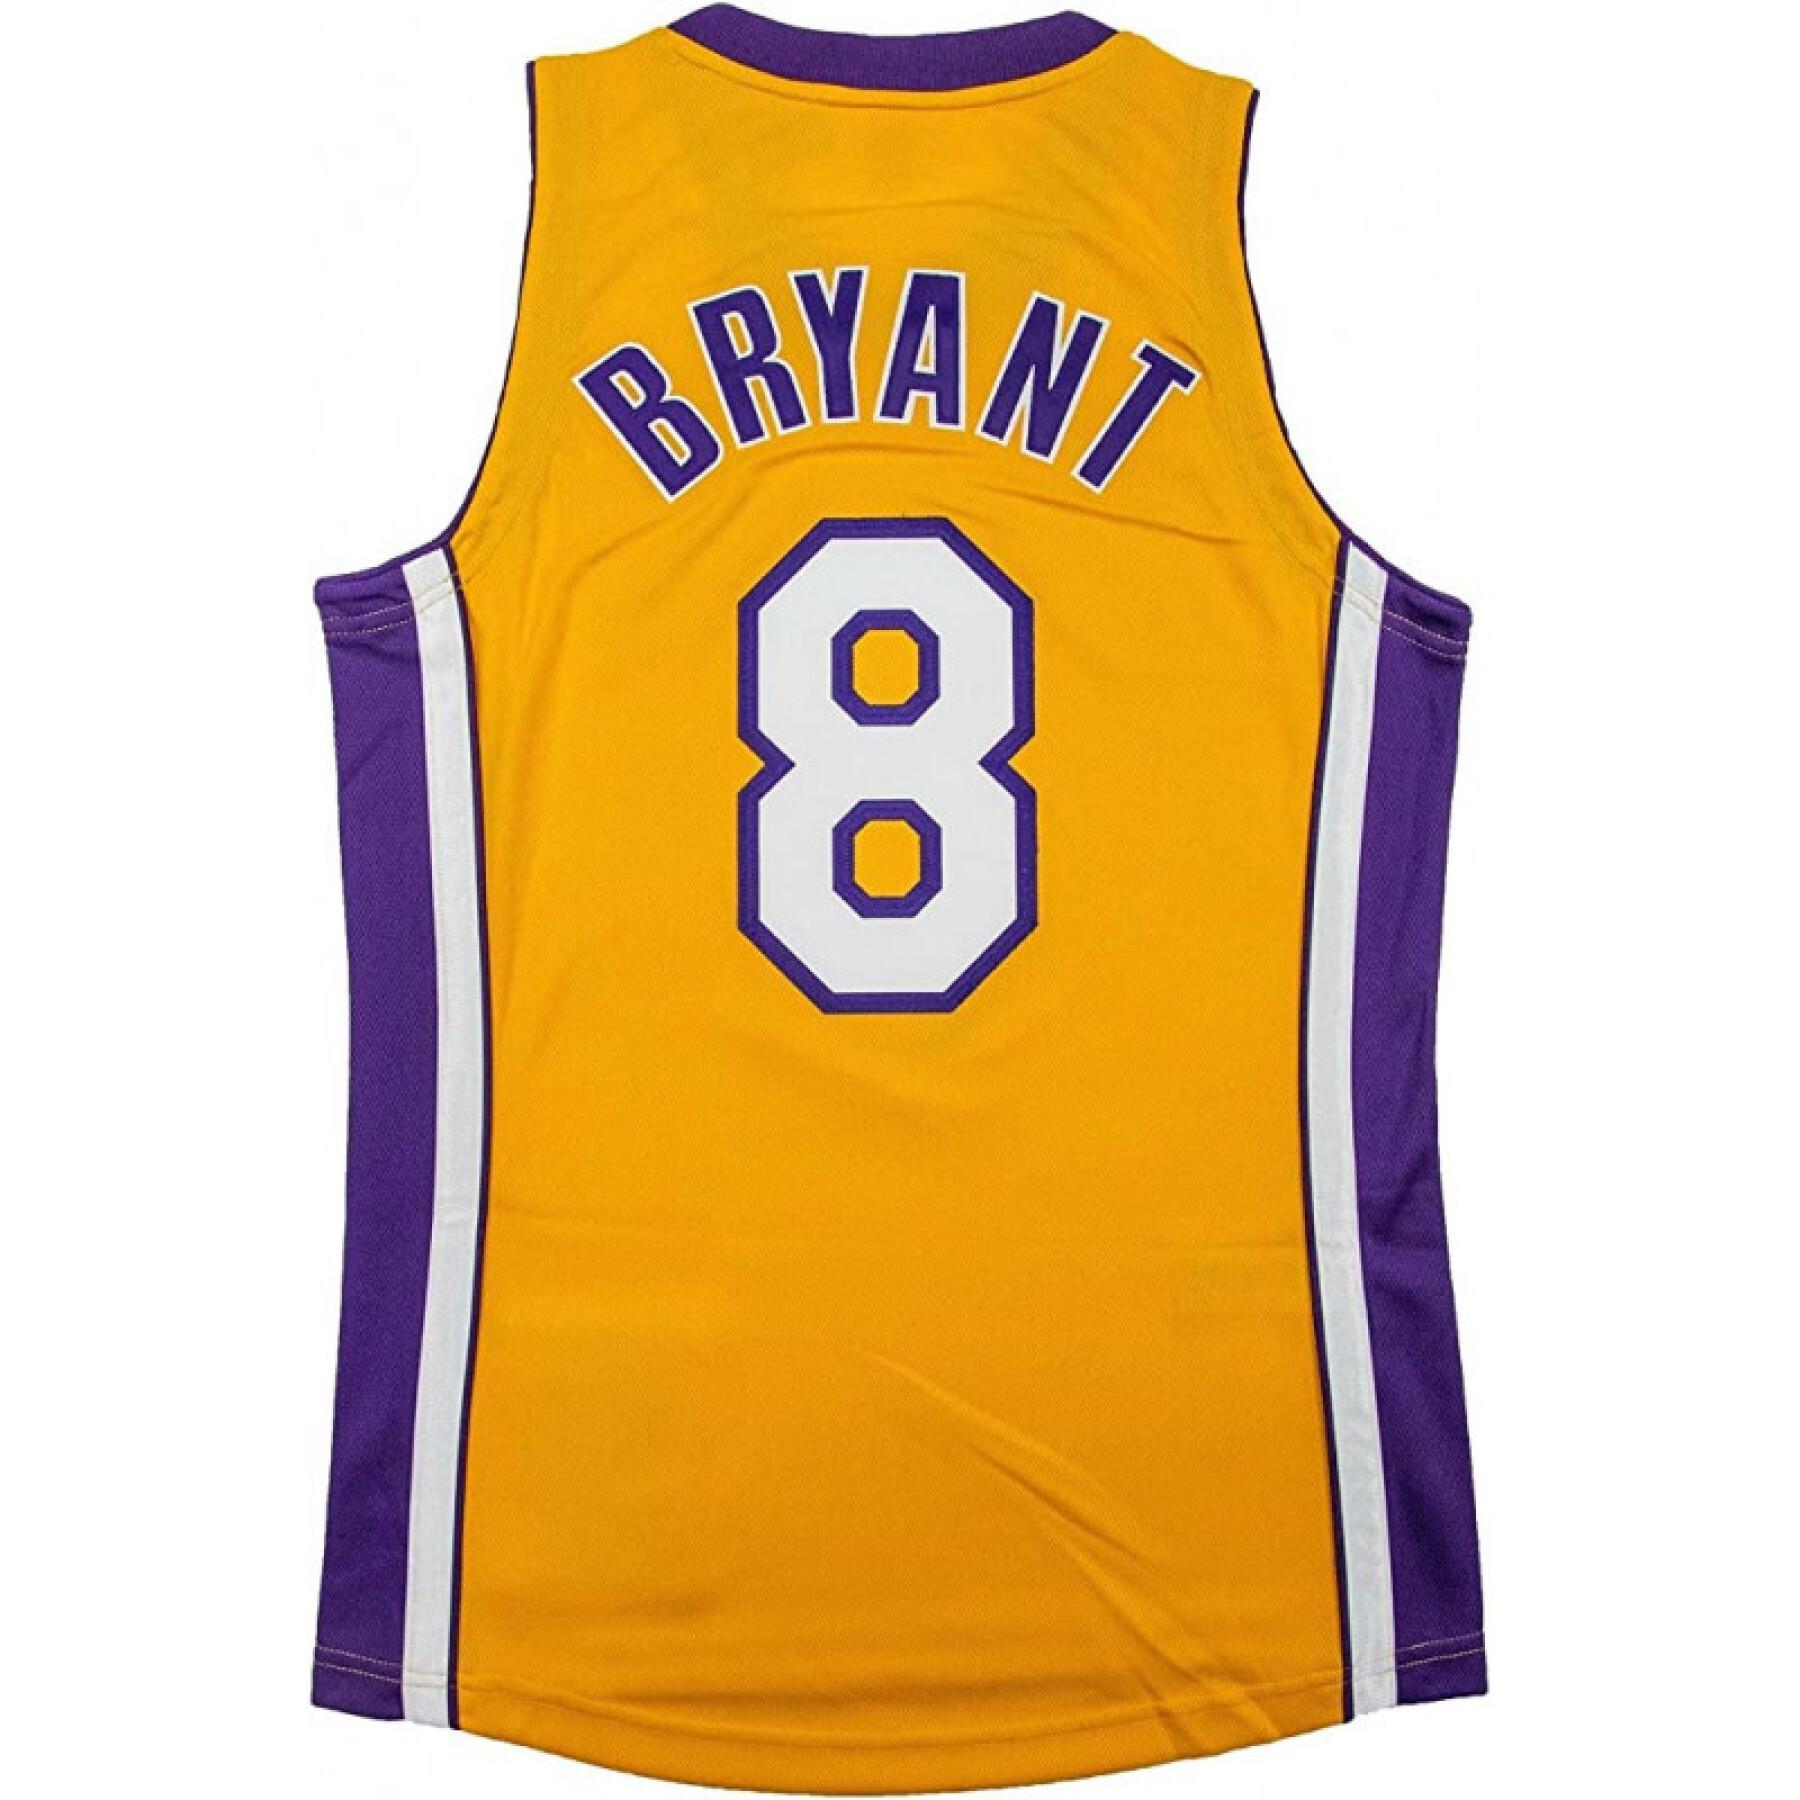 Jersey Los Angeles Lakers NBA Authentic 2001 Kobe Bryant